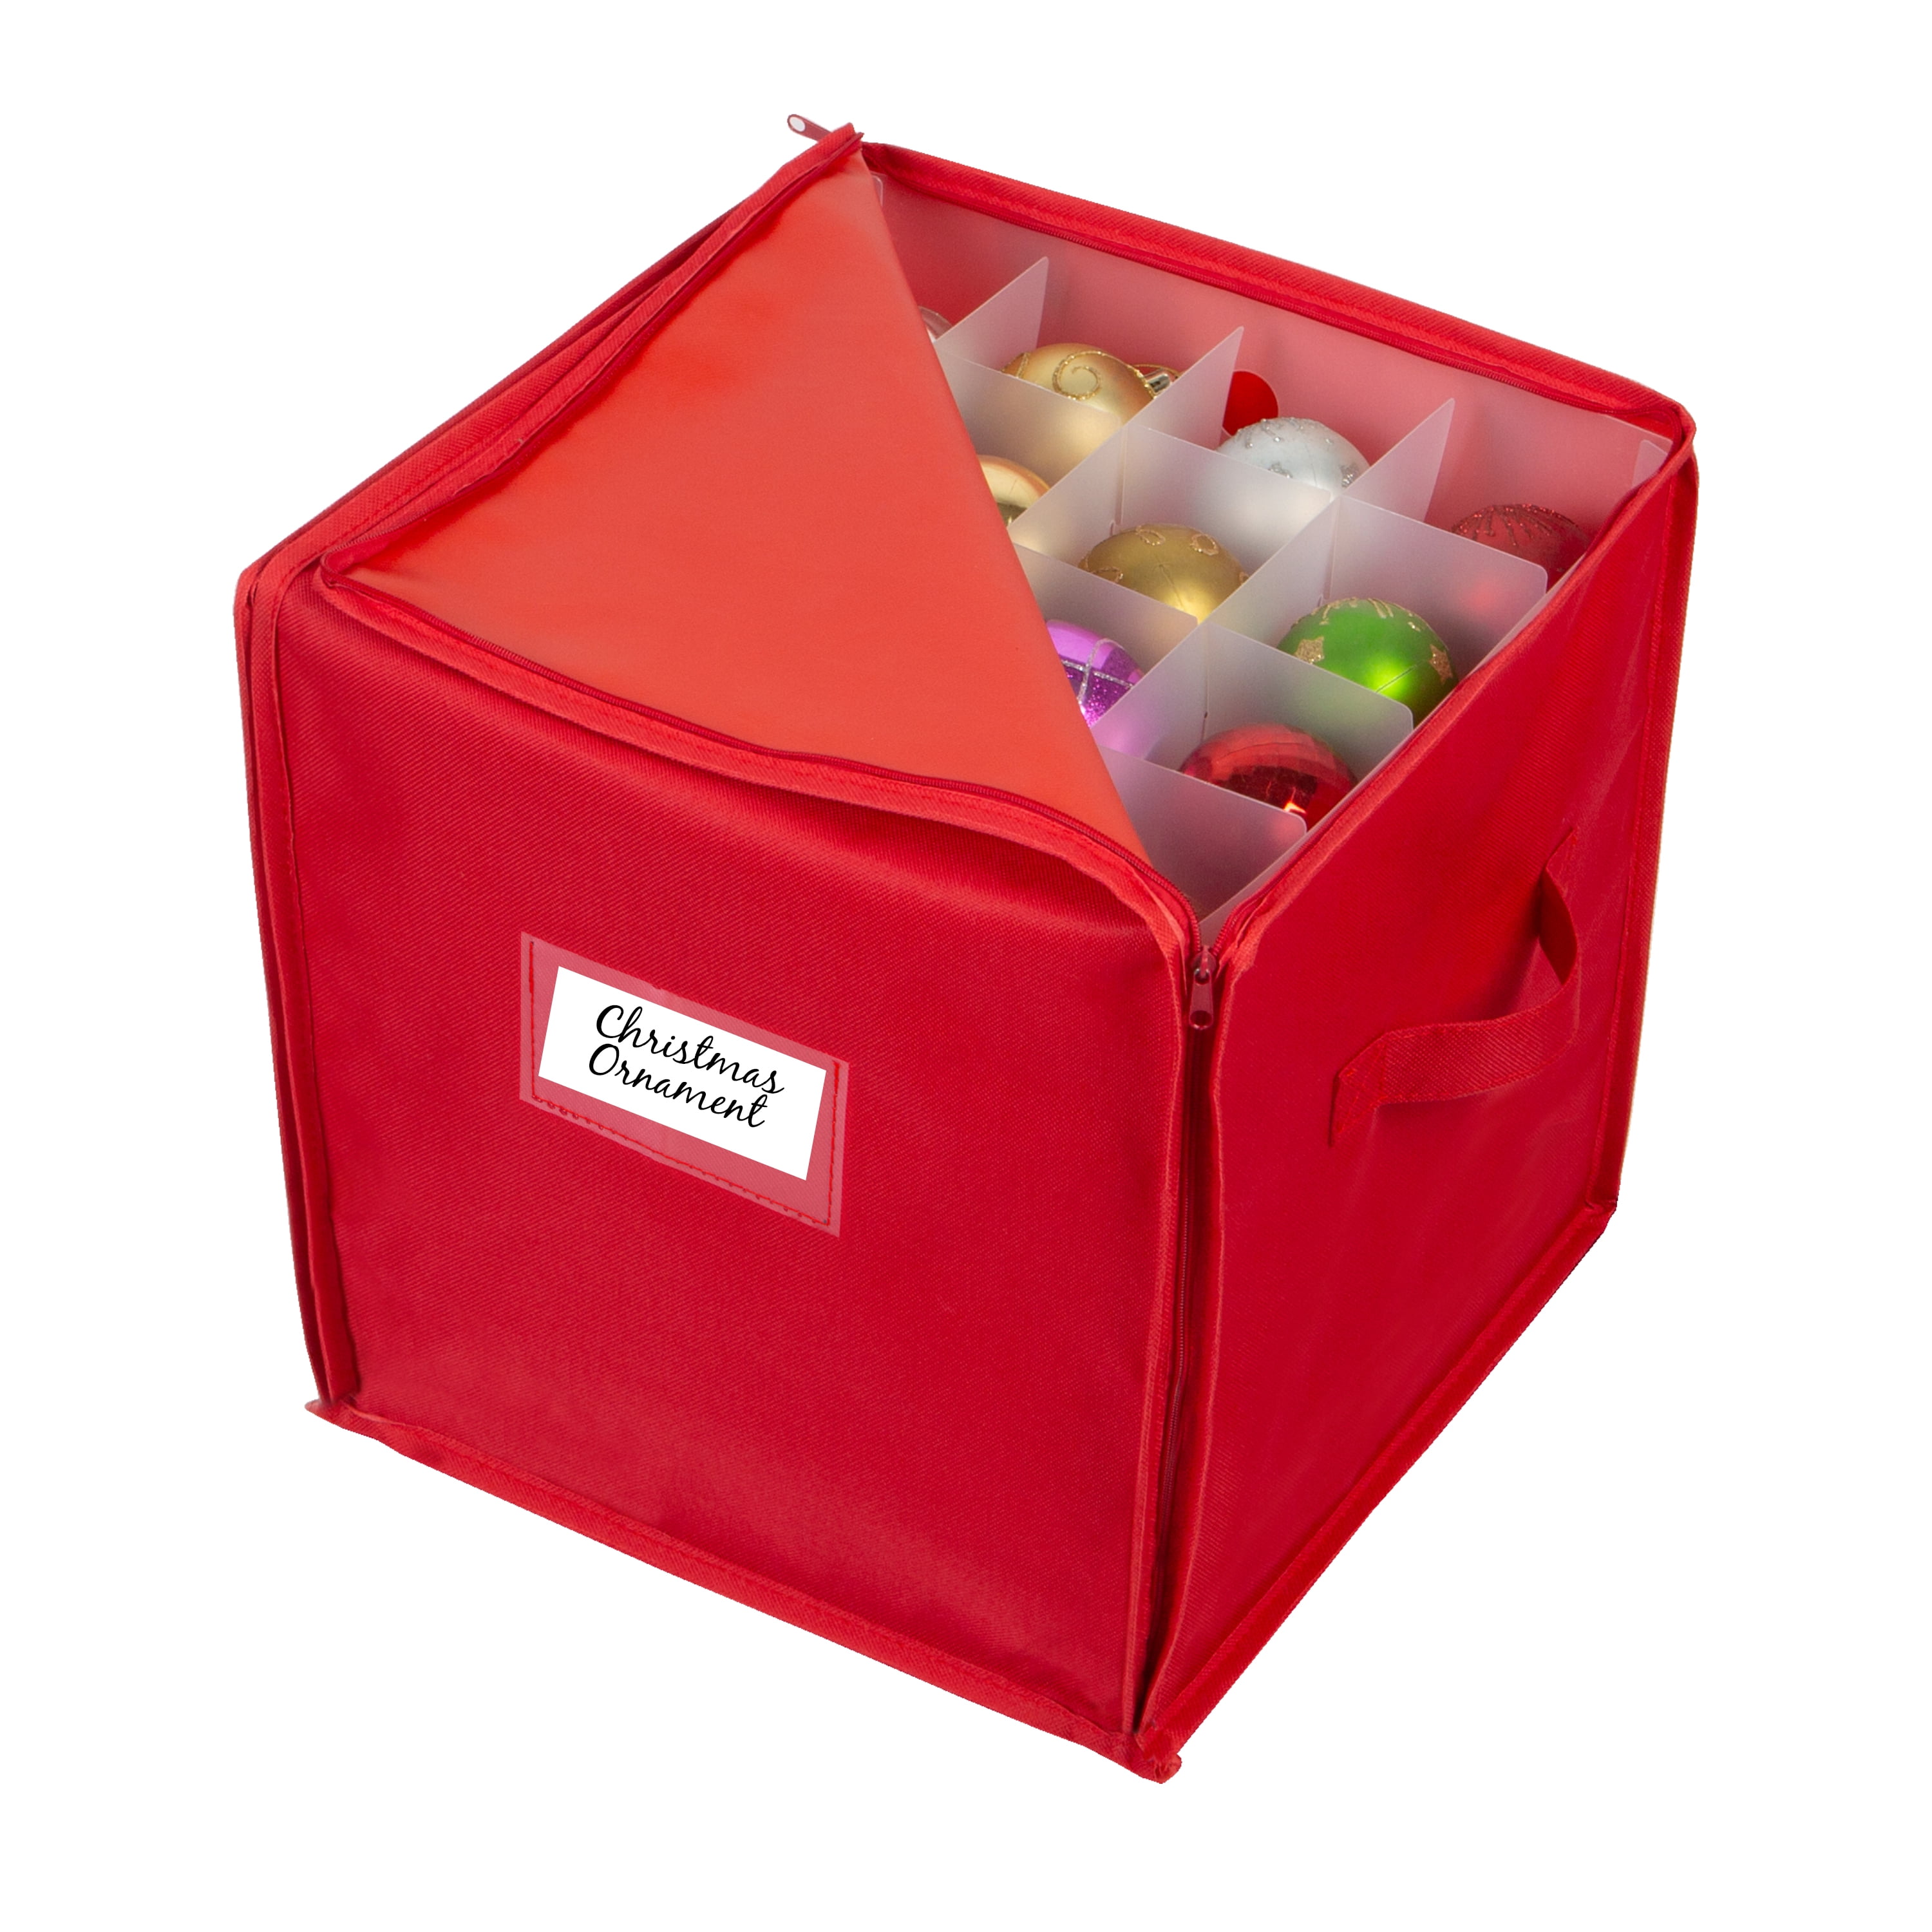 Winter Wonderland 112-Cell Ornament Storage Chest in Red/Green, NEW